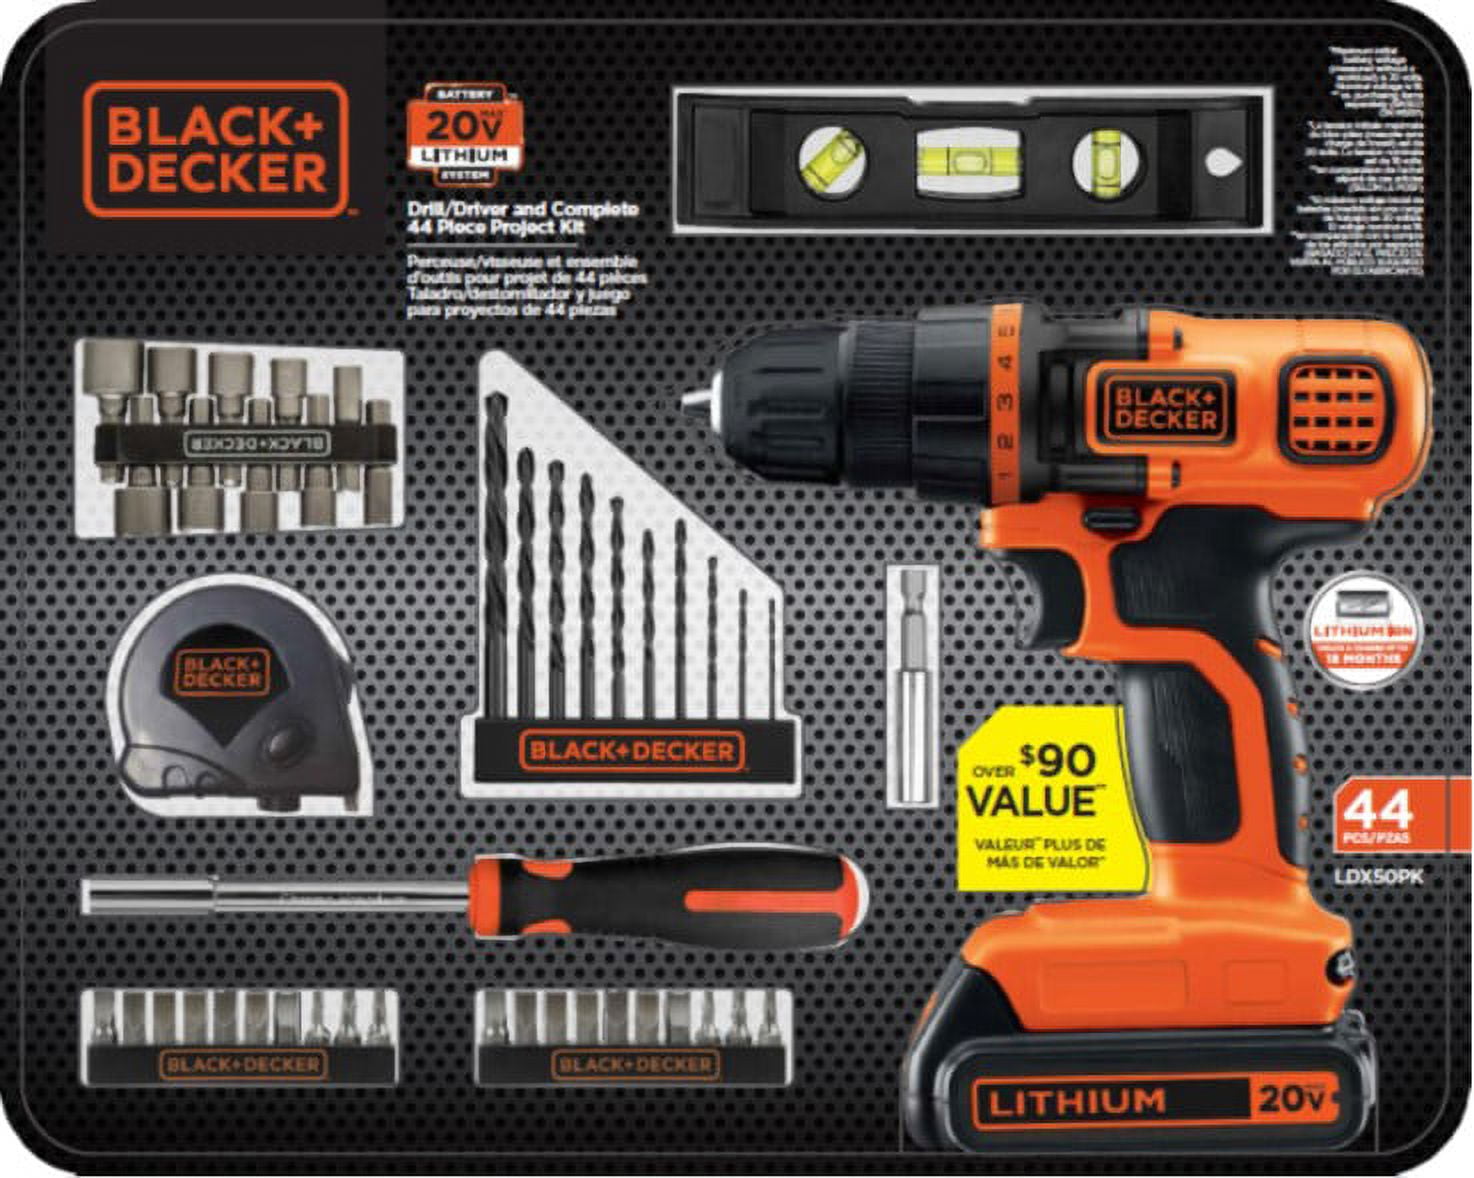 BLACK+DECKER 20-Volt MAX Drill Project Kit with 53-Pieces and Hard Case,  BCD70253PKWM 